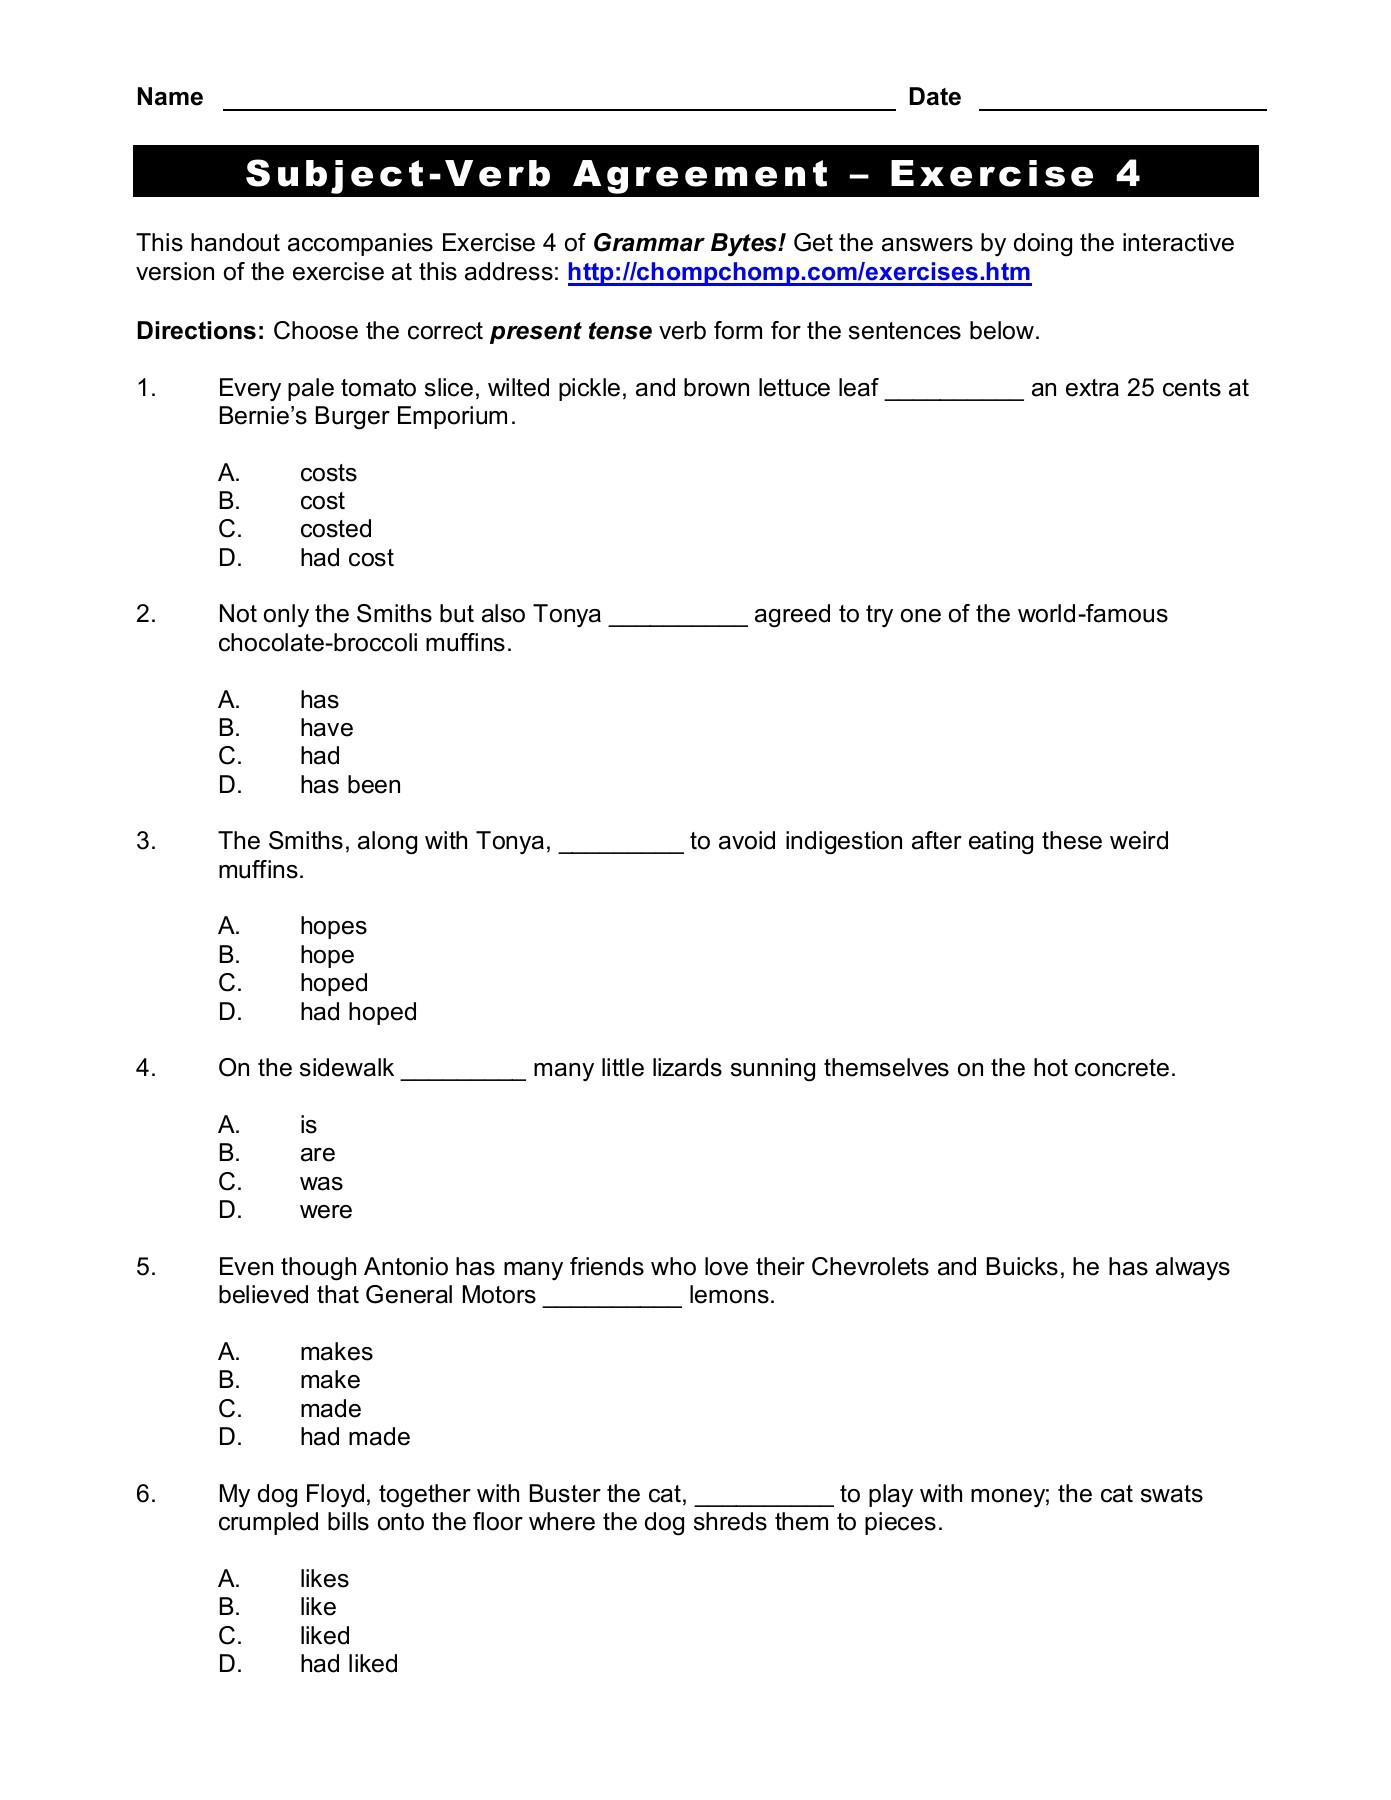 Subject And Verb Agreement Worksheet Db excel